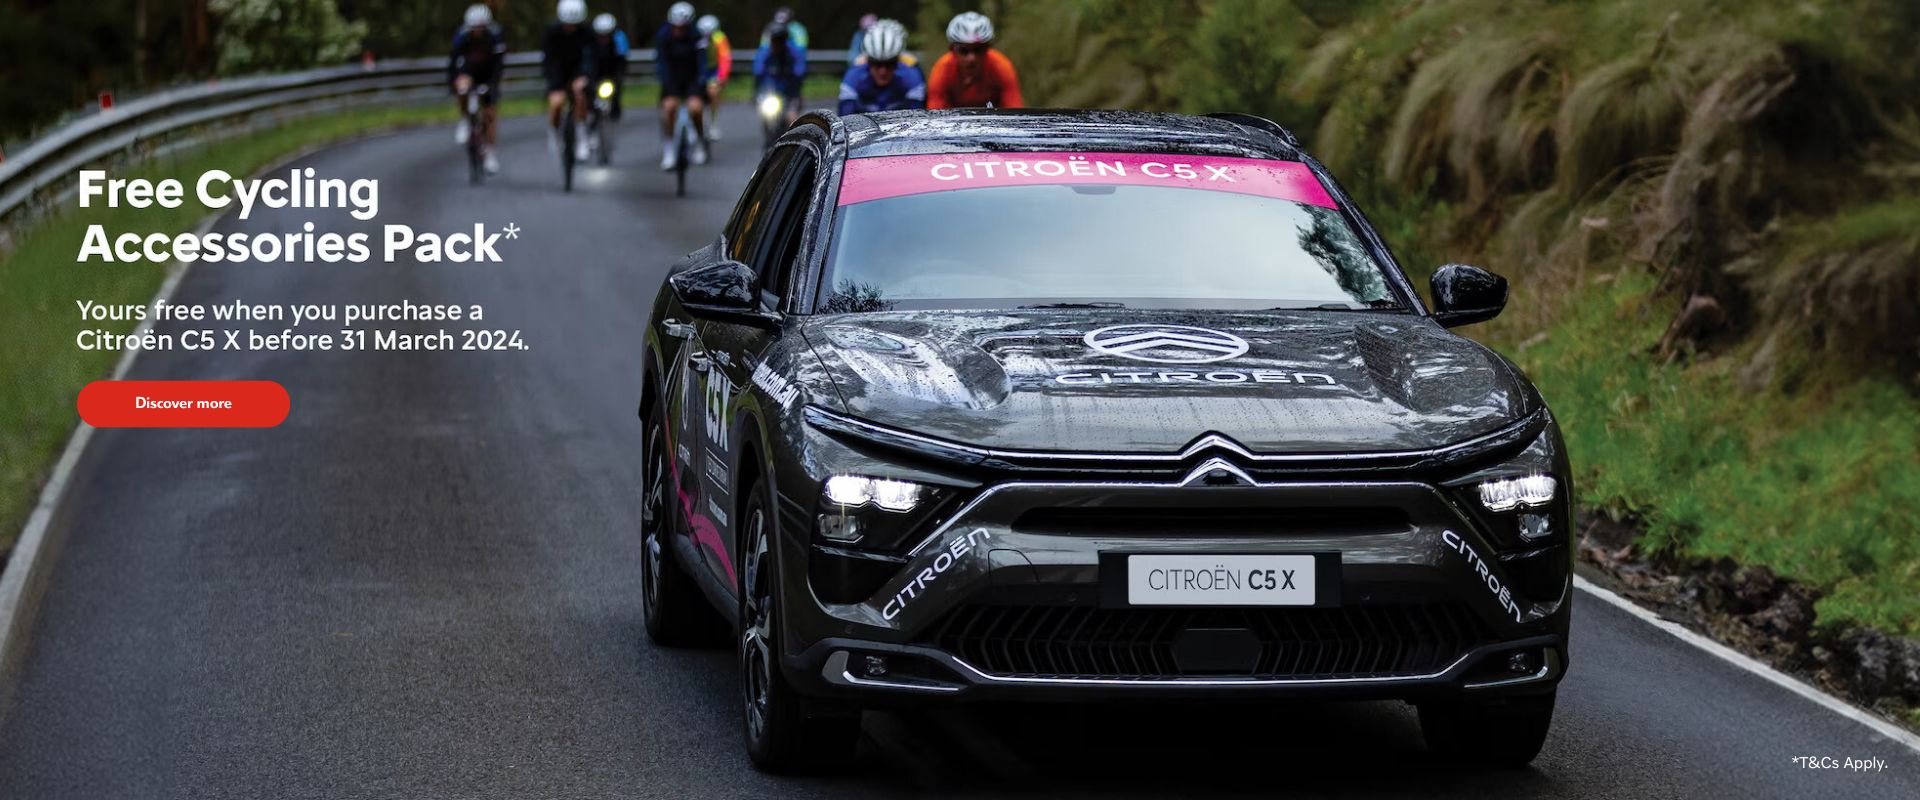 Free Cycling Accessories Pack. Yours free when you purchase a Citroen C5 X before March 31.